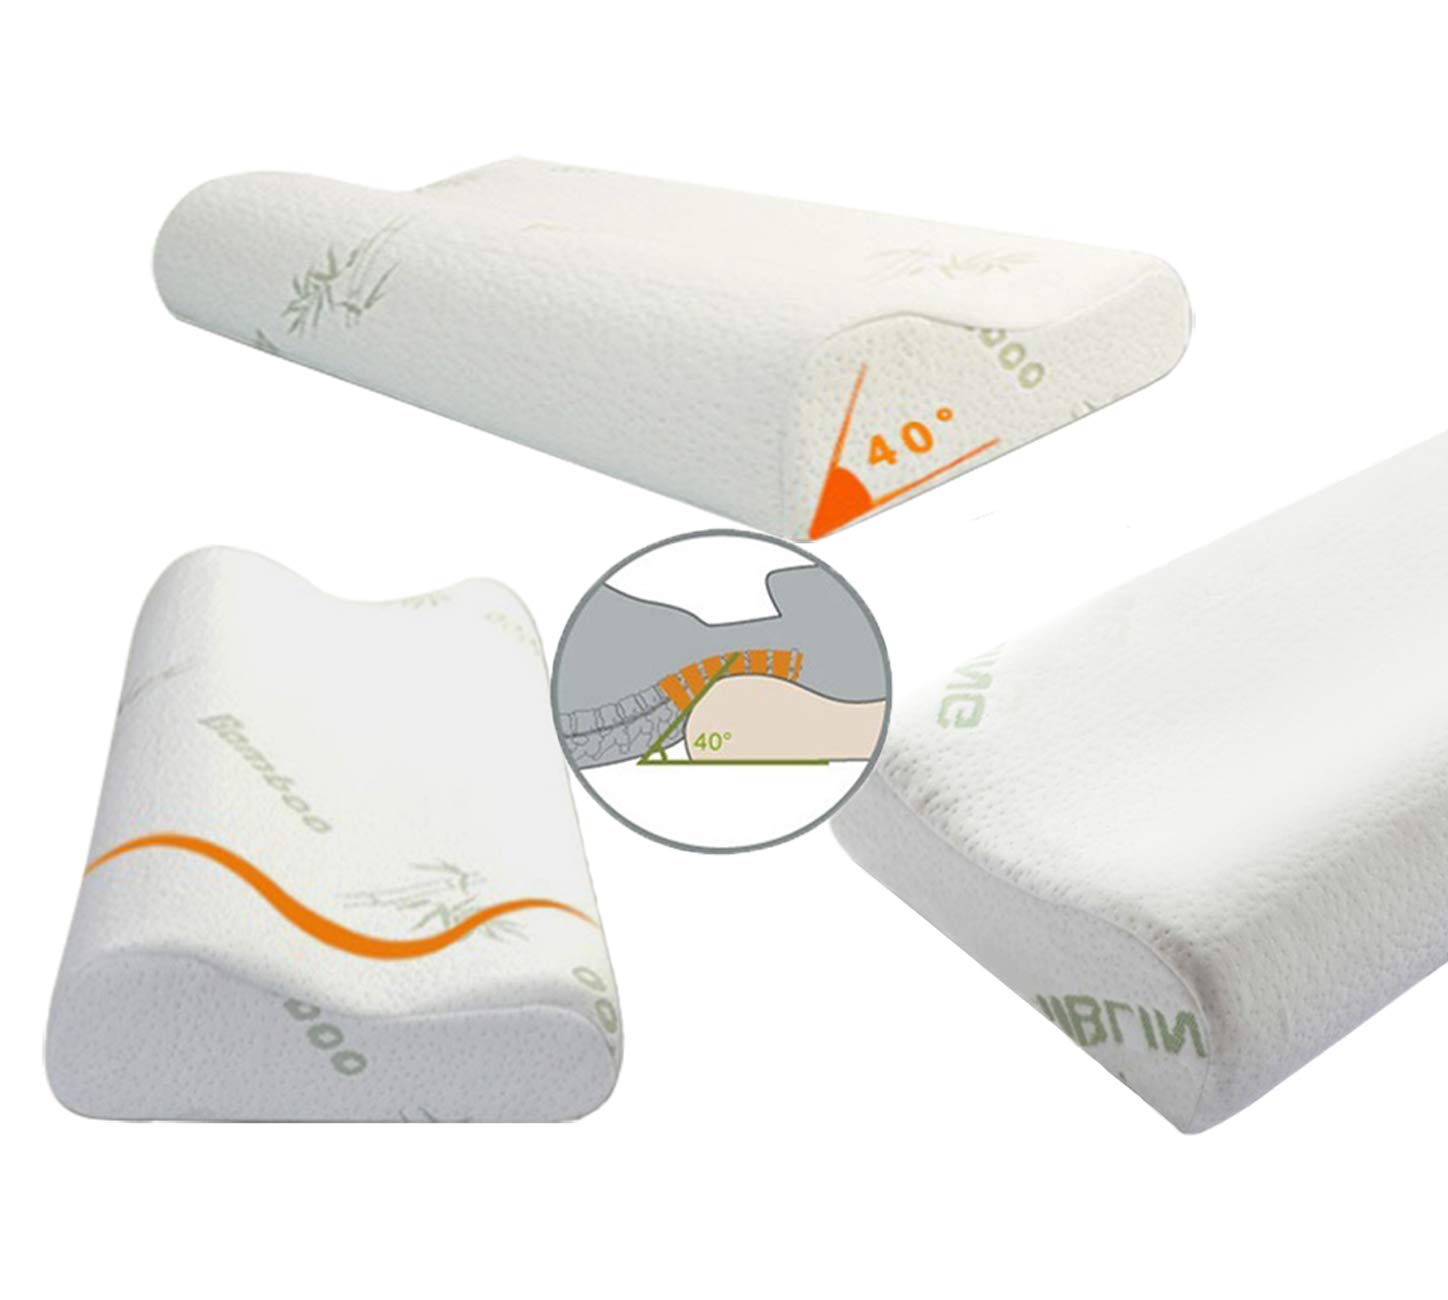 Bamboo Cervical Orthopaedic Contour Memory Foam Firm Pillow Neck Back Support 